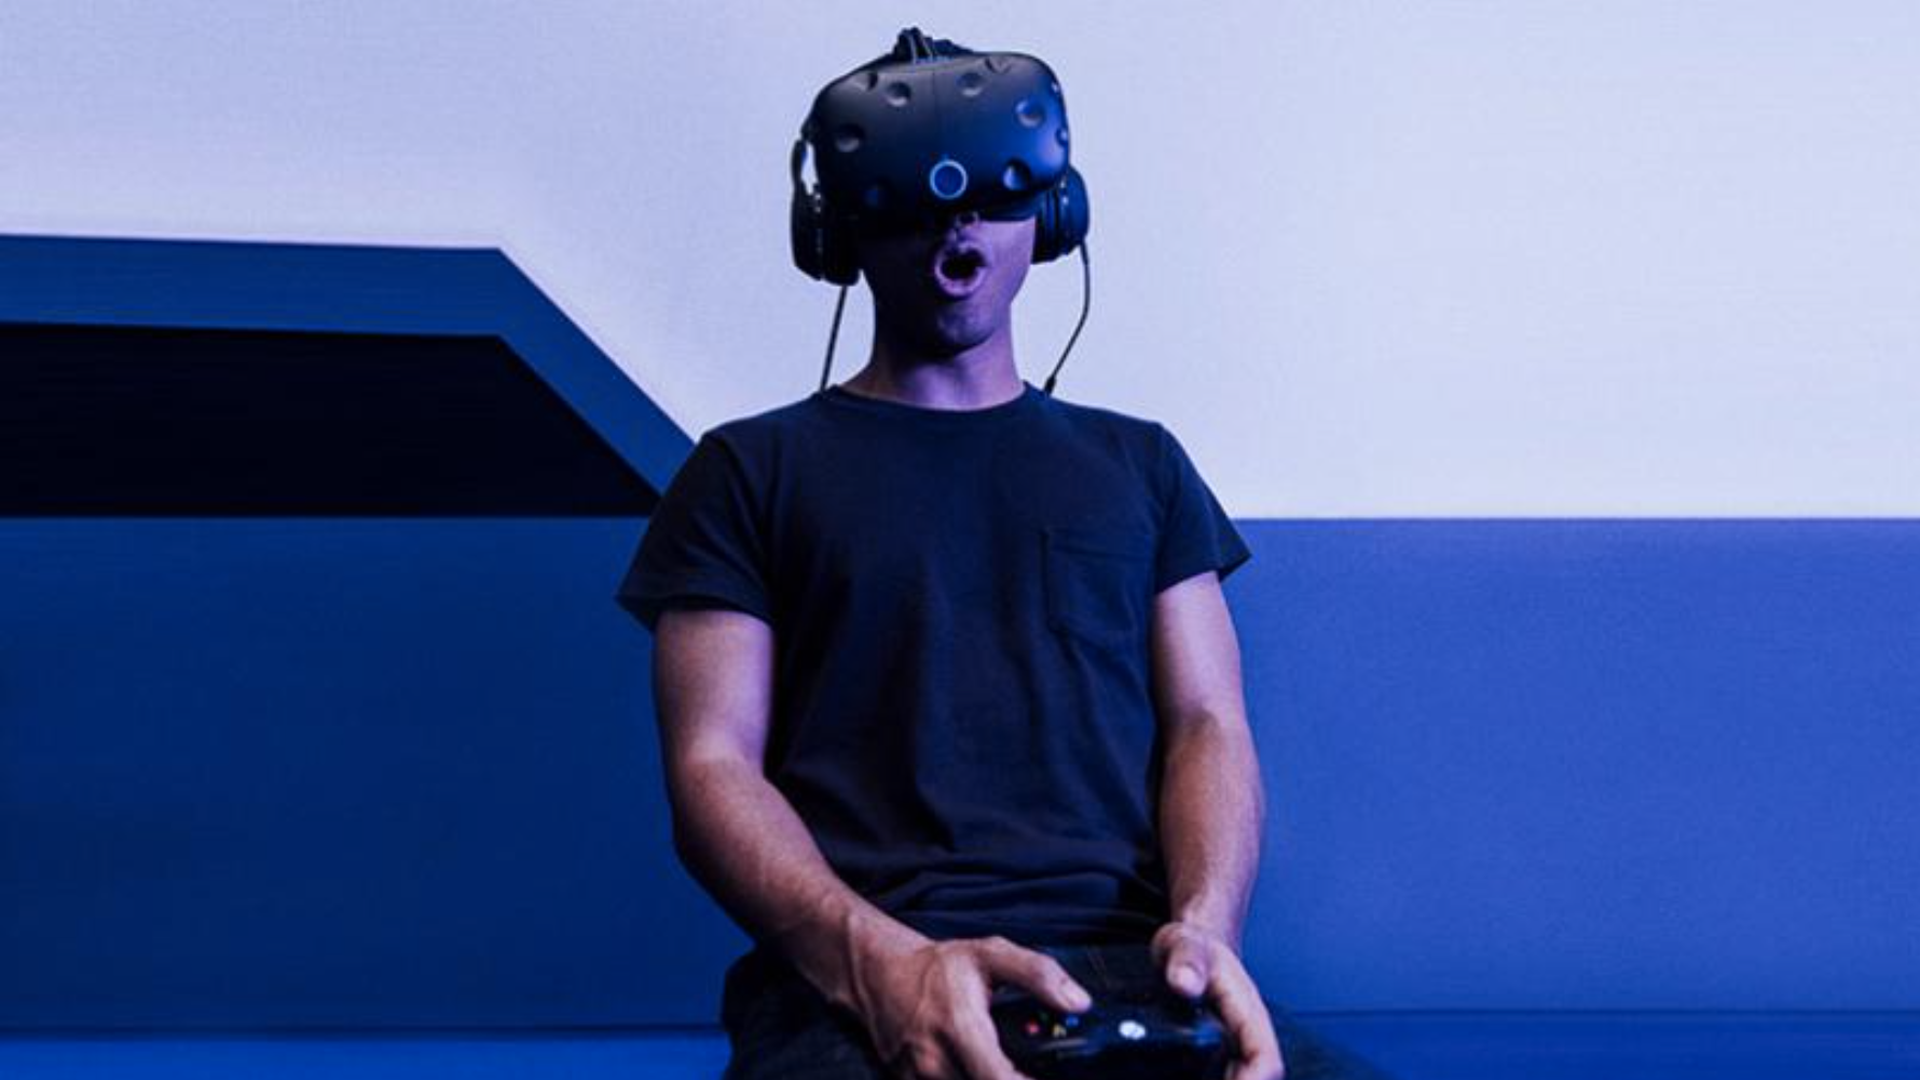 A man wearing a VR headset and looking surprised